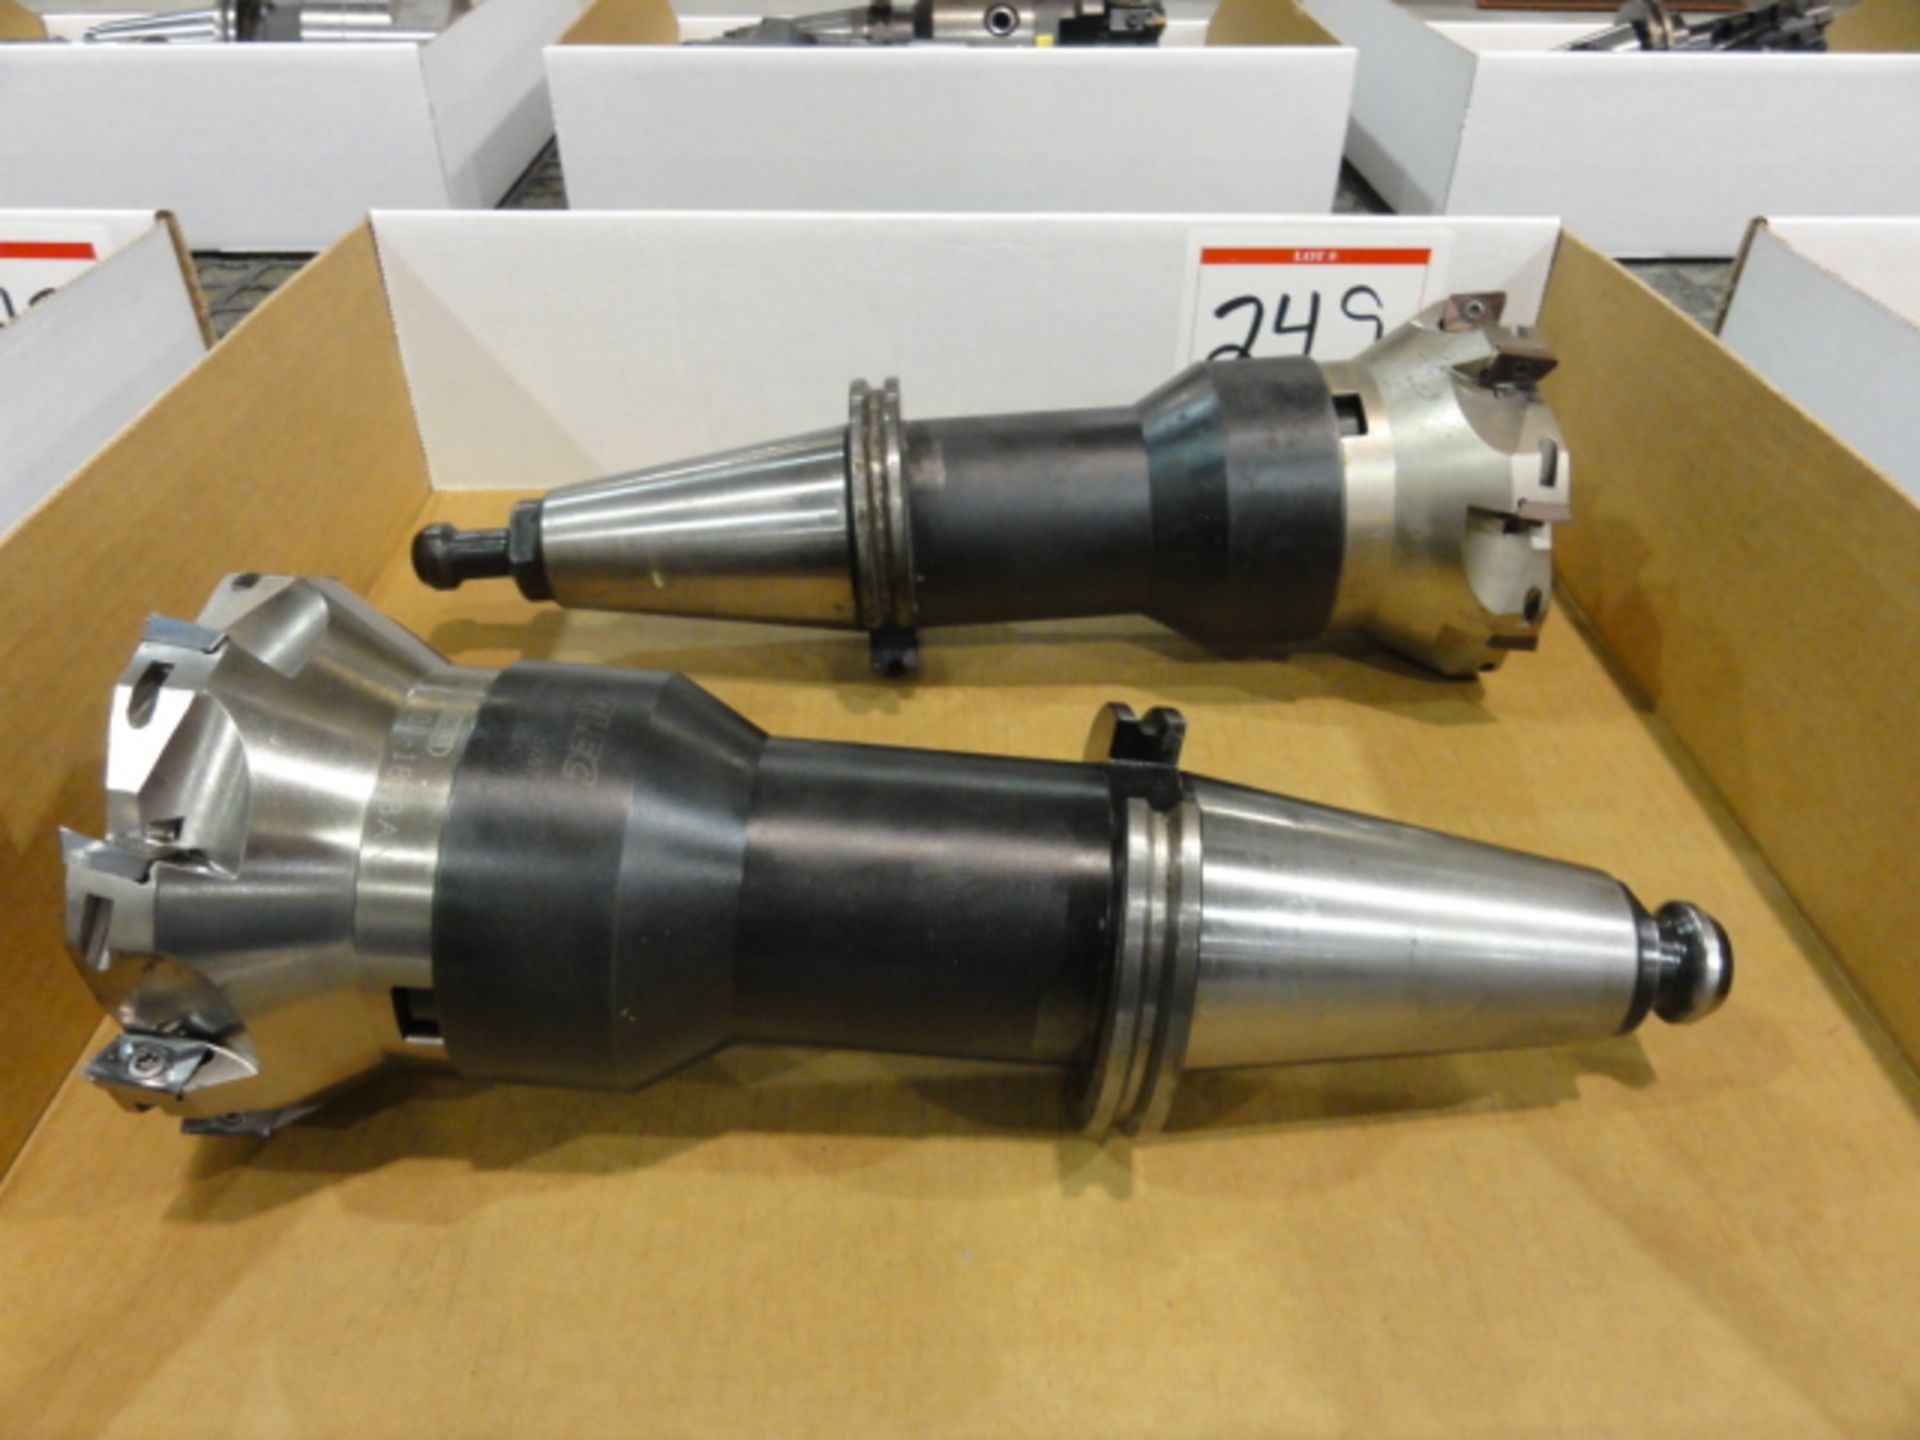 Lot of (2) CAT 50 Tool Holders w/ Seco R220.69-05.00-18-8AN Carbide Insert Facing/Finishing Tools - Image 2 of 2